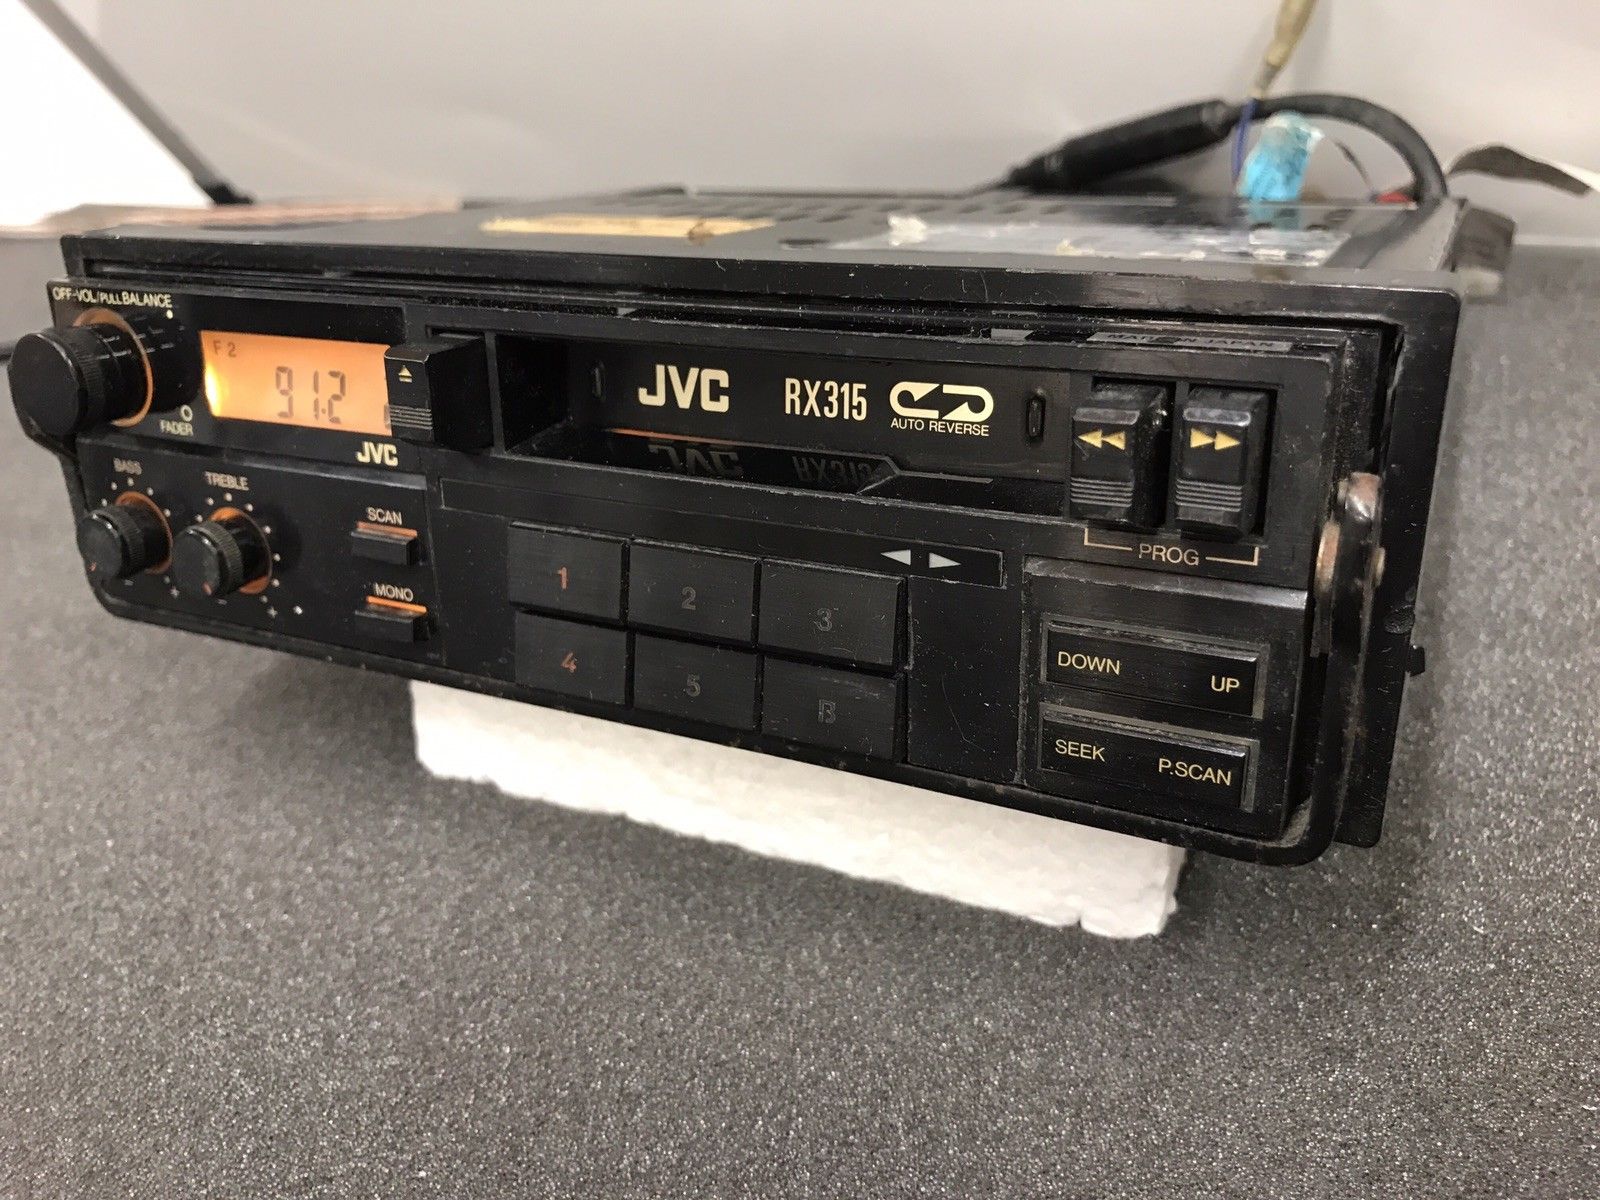 Old Classic Jvc Car Radio Cassette Player Model Rx315 Vintage Pull Out Type